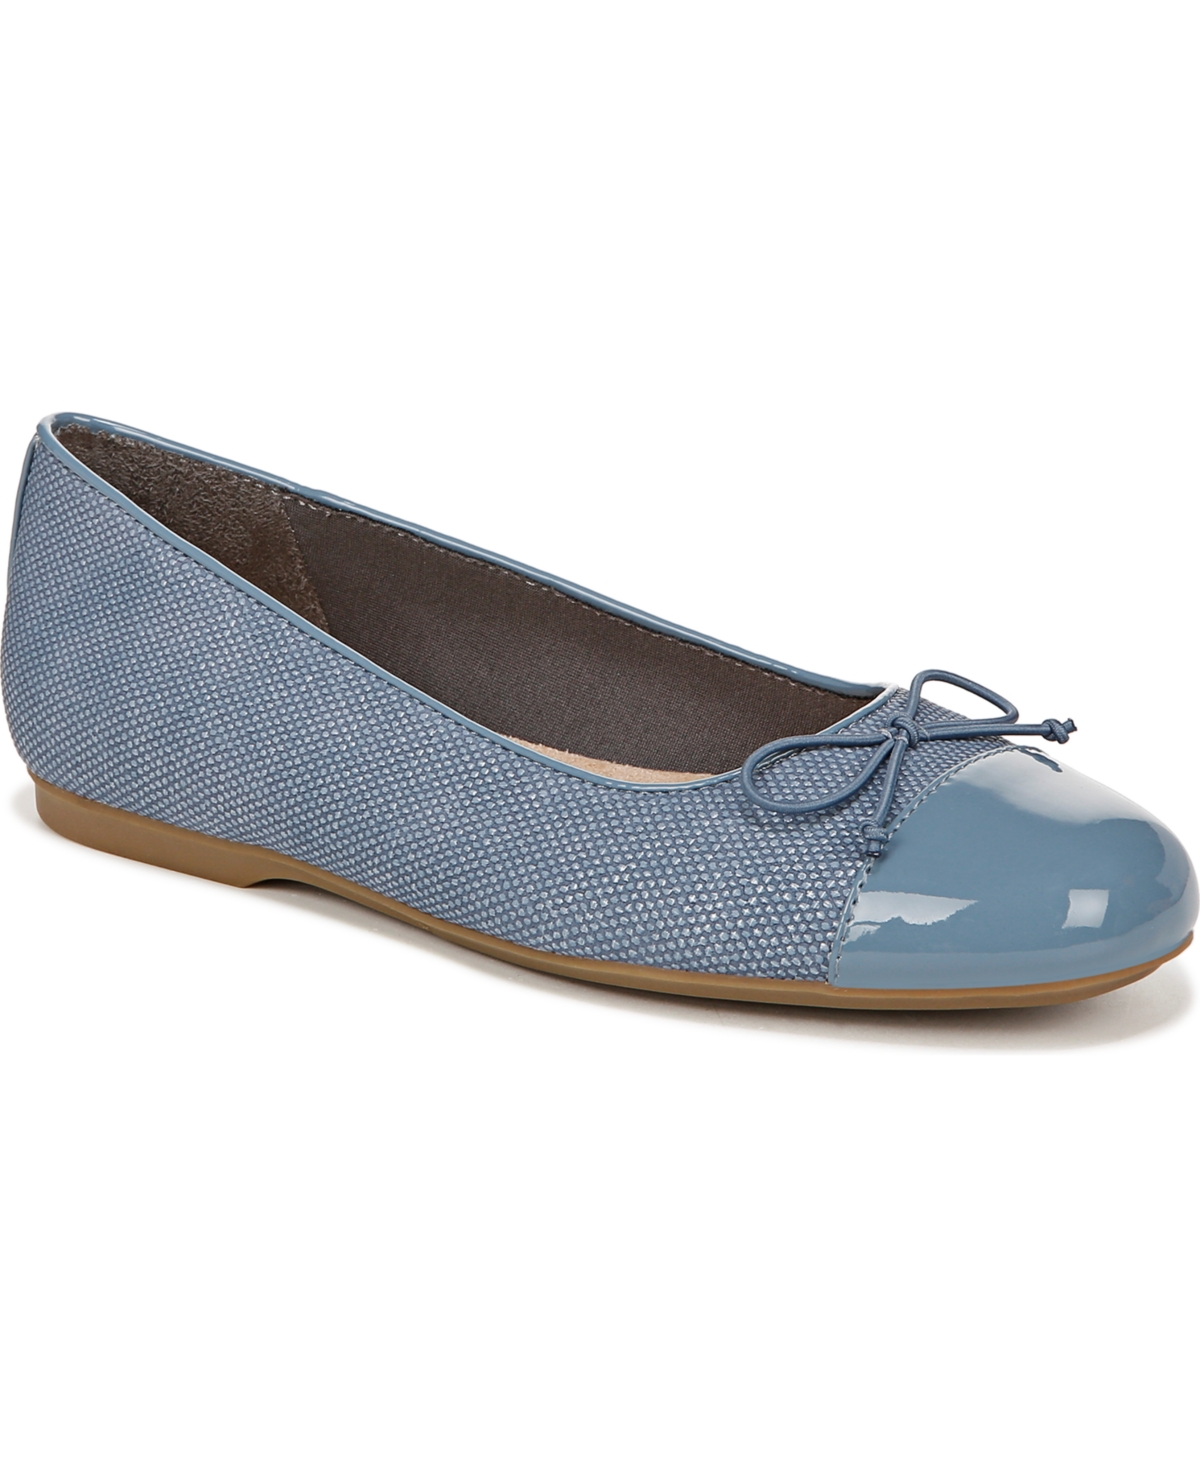 Dr. Scholl's Women's Wexley Bow Flats In Oxide Blue Faux Leather